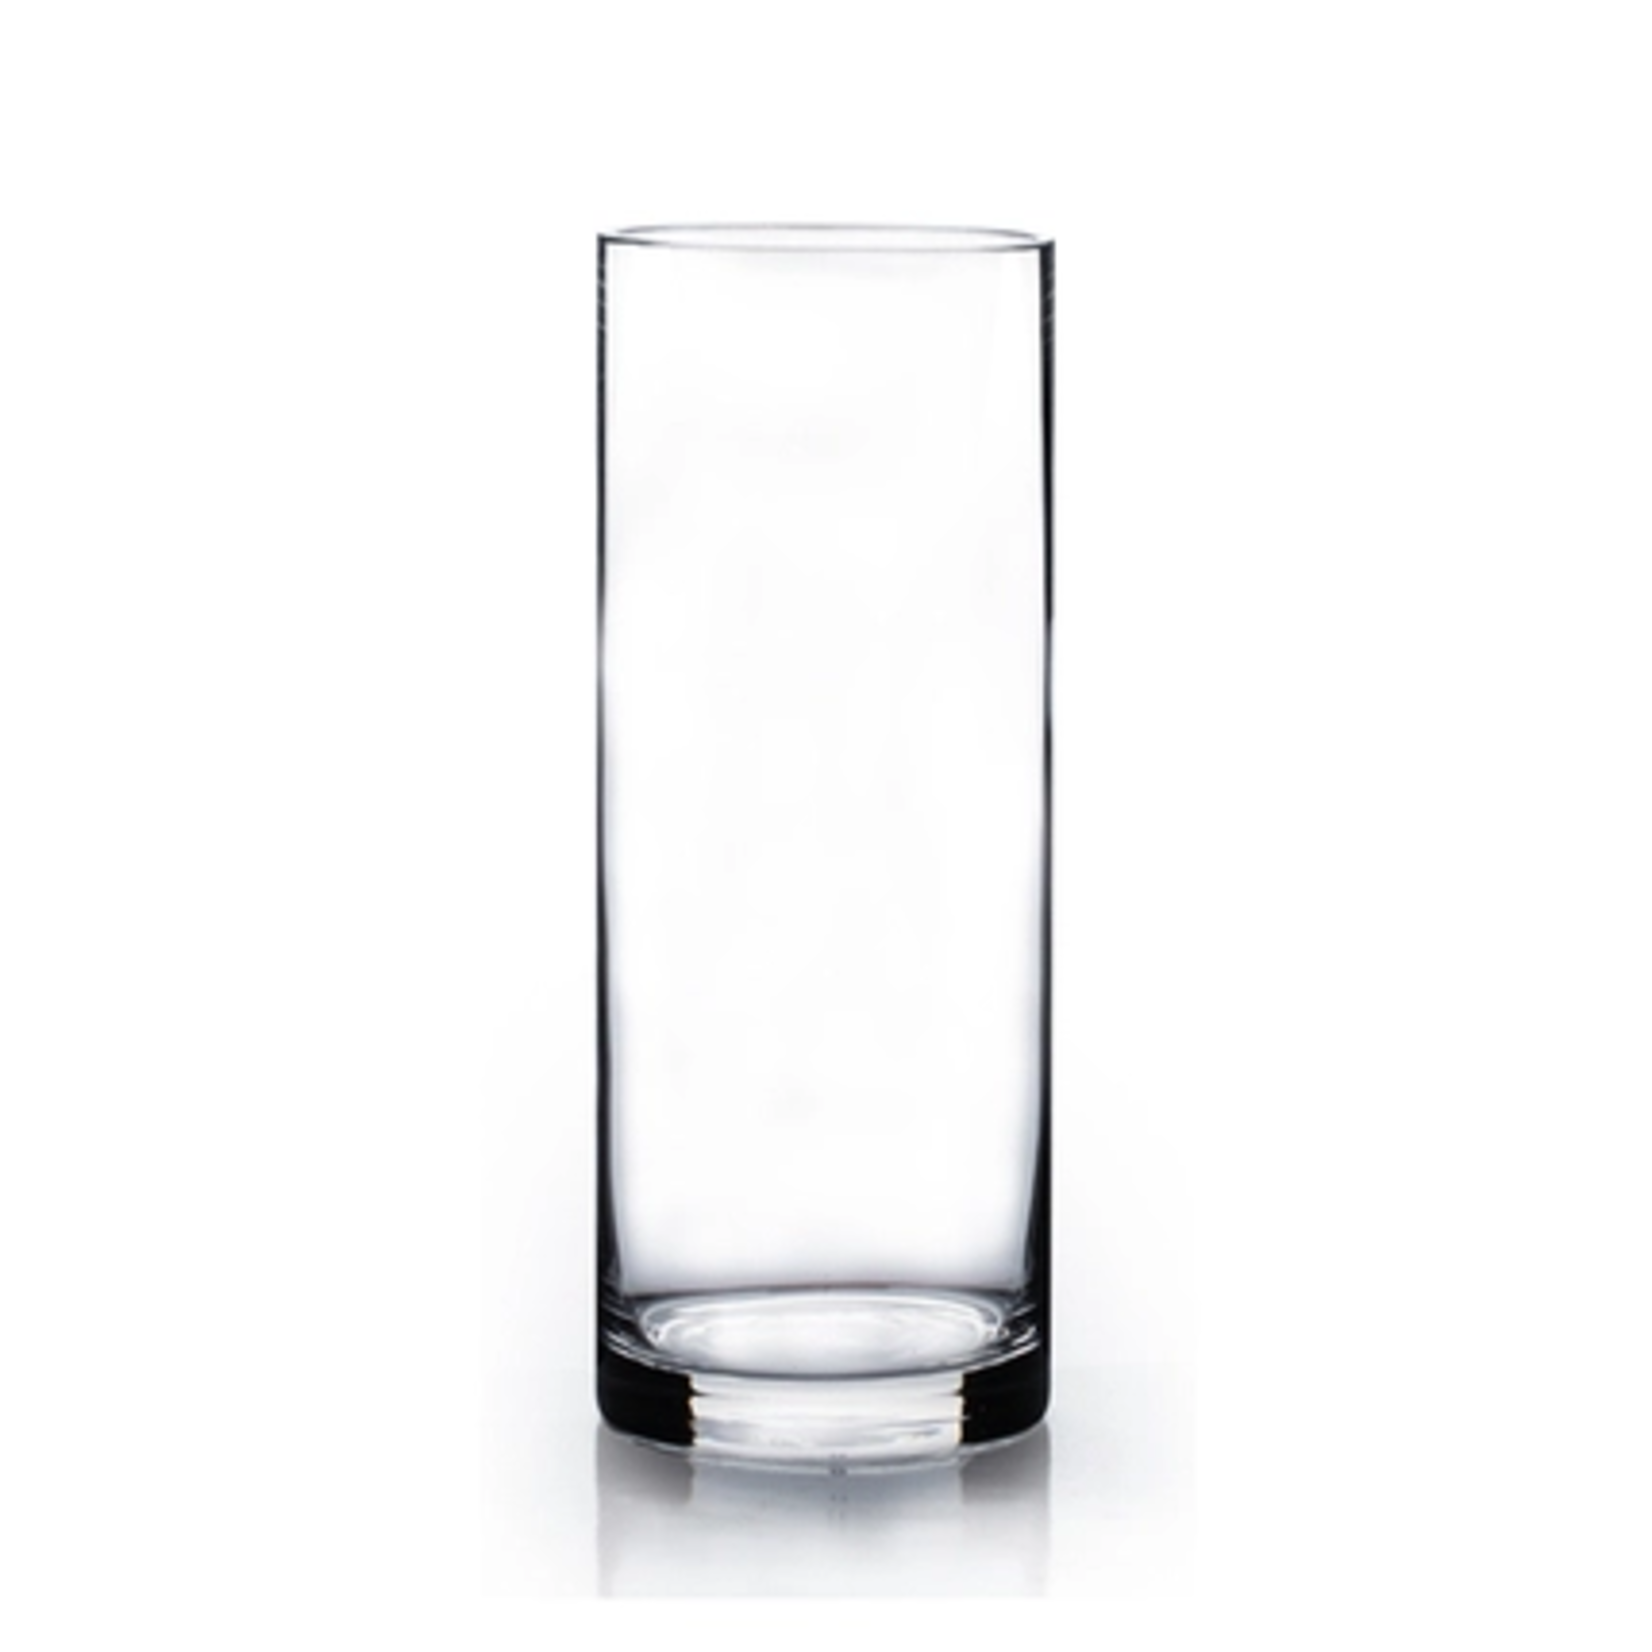 12"H X 5" CLEAR GLASS CYLINDER VASE